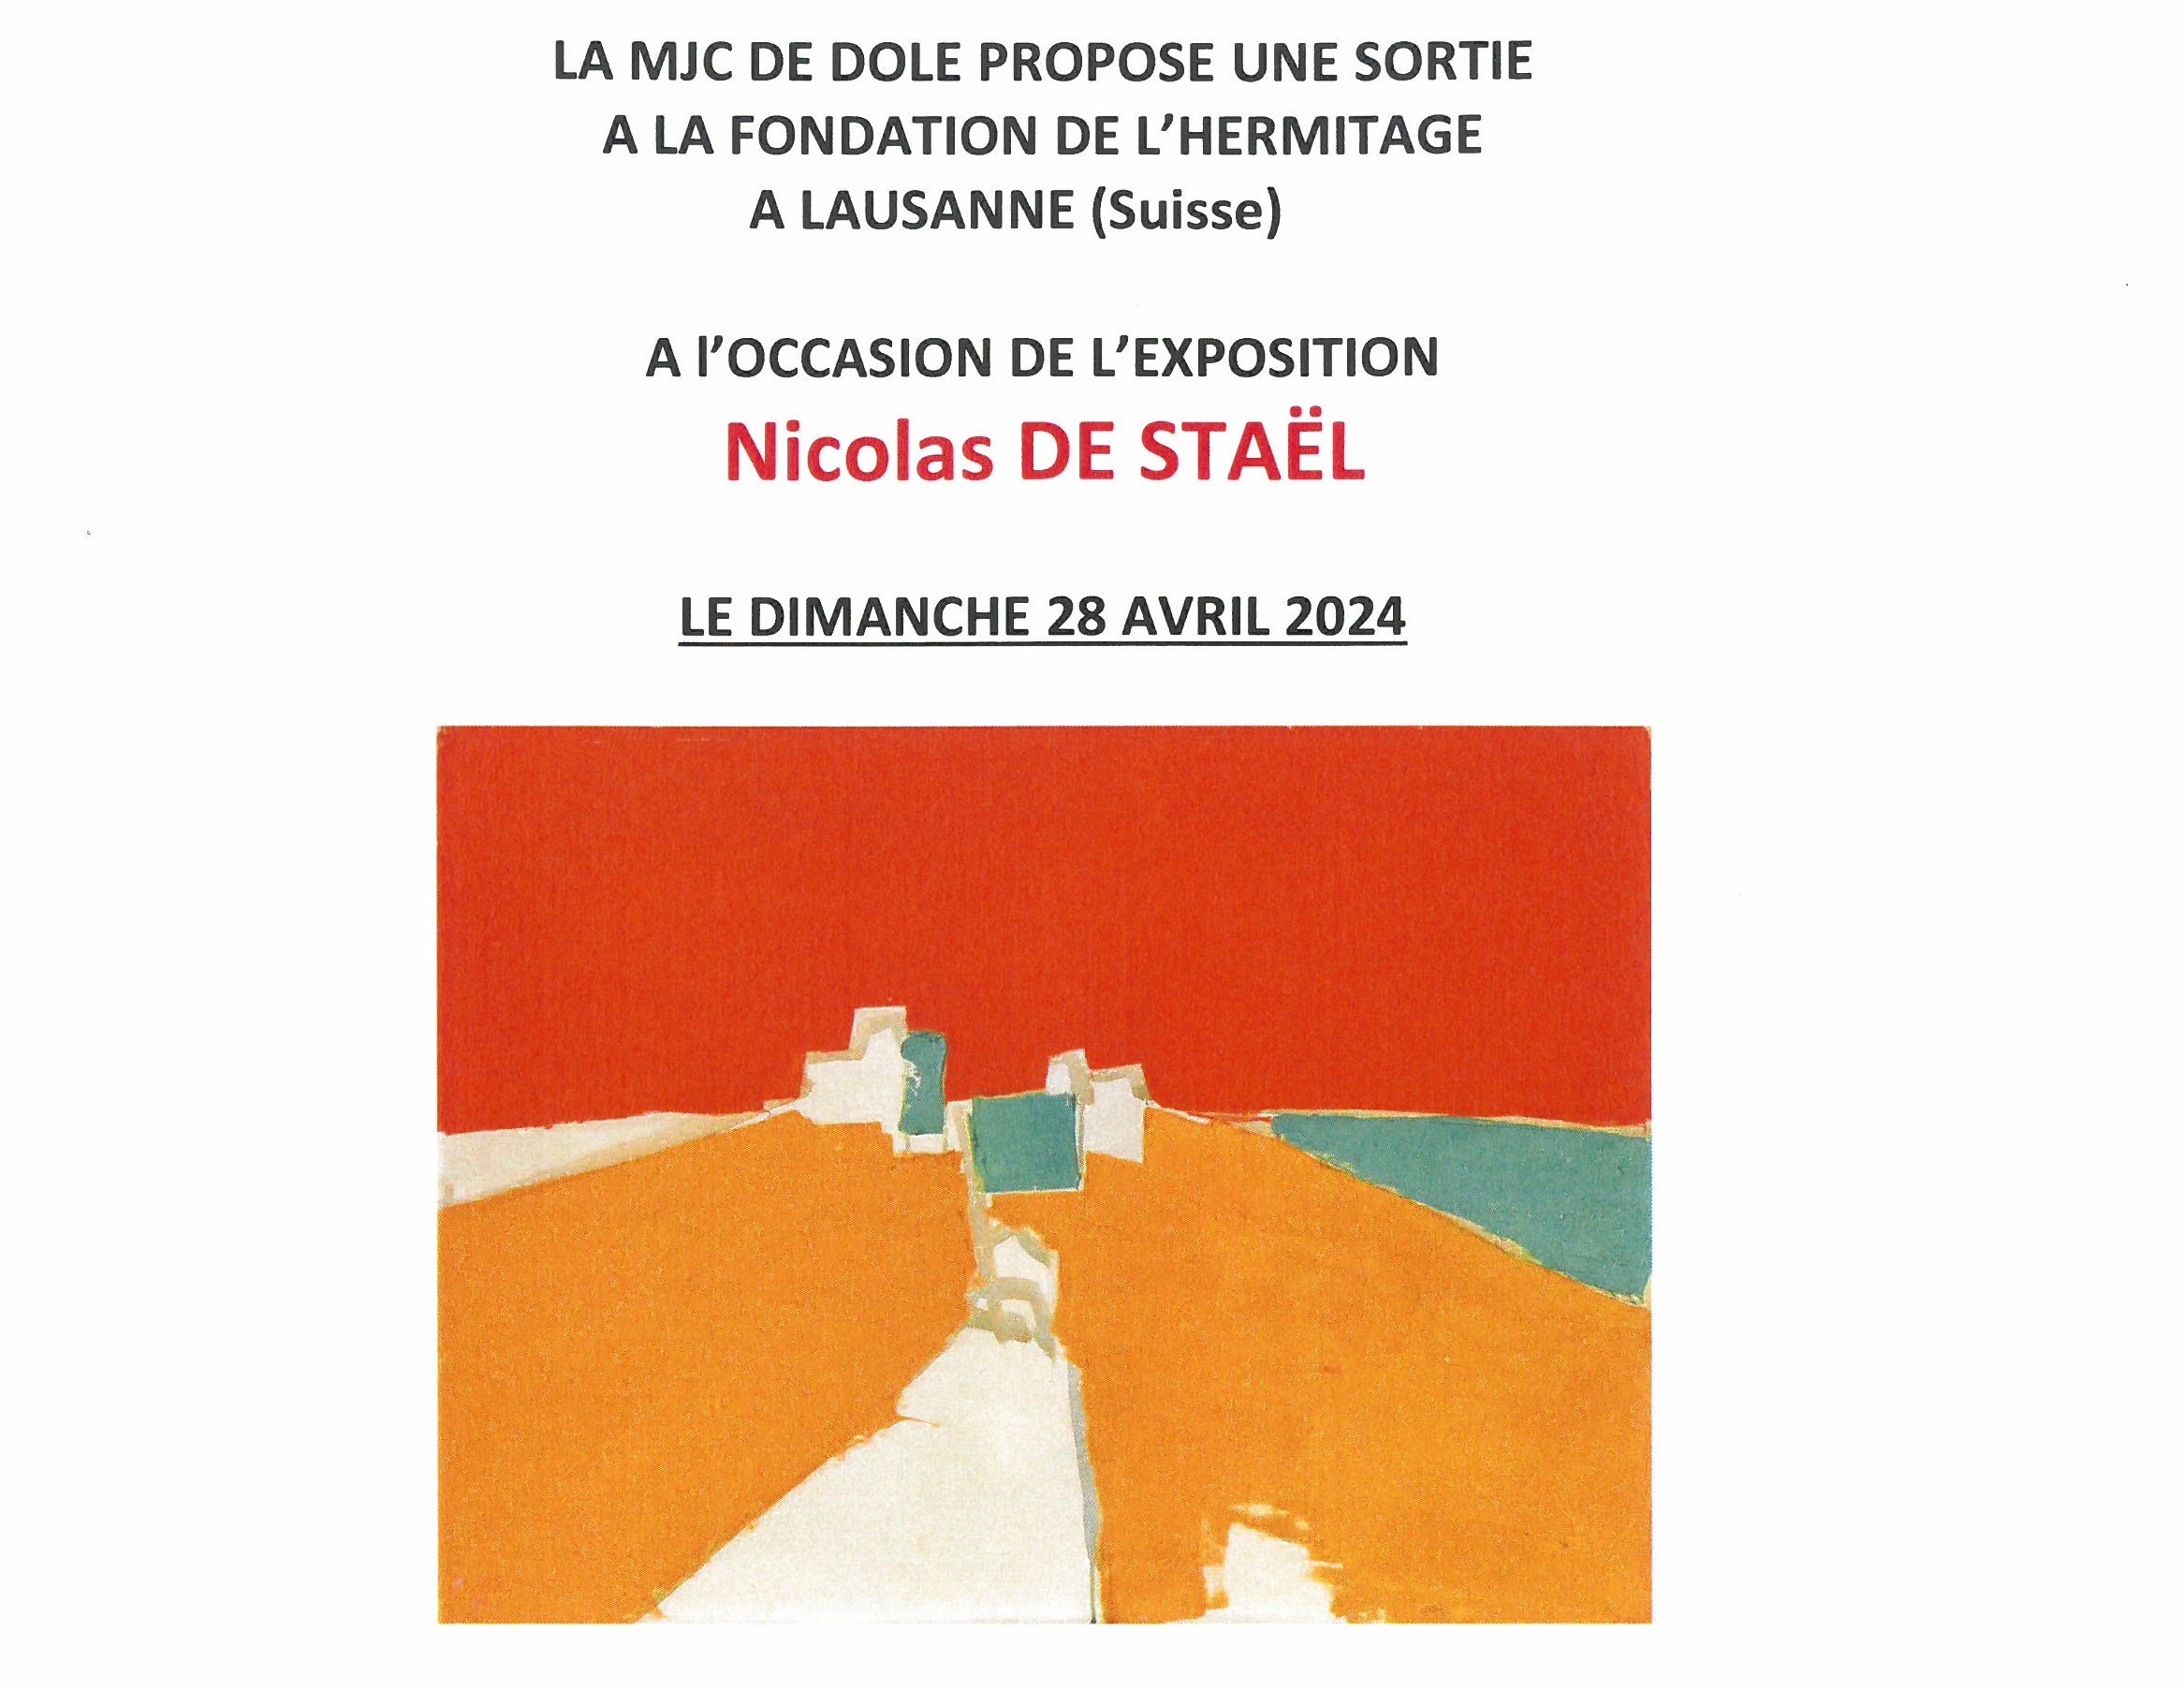 2024 02 26 Gros Plan Tract 1 Expo N. DE STAEL